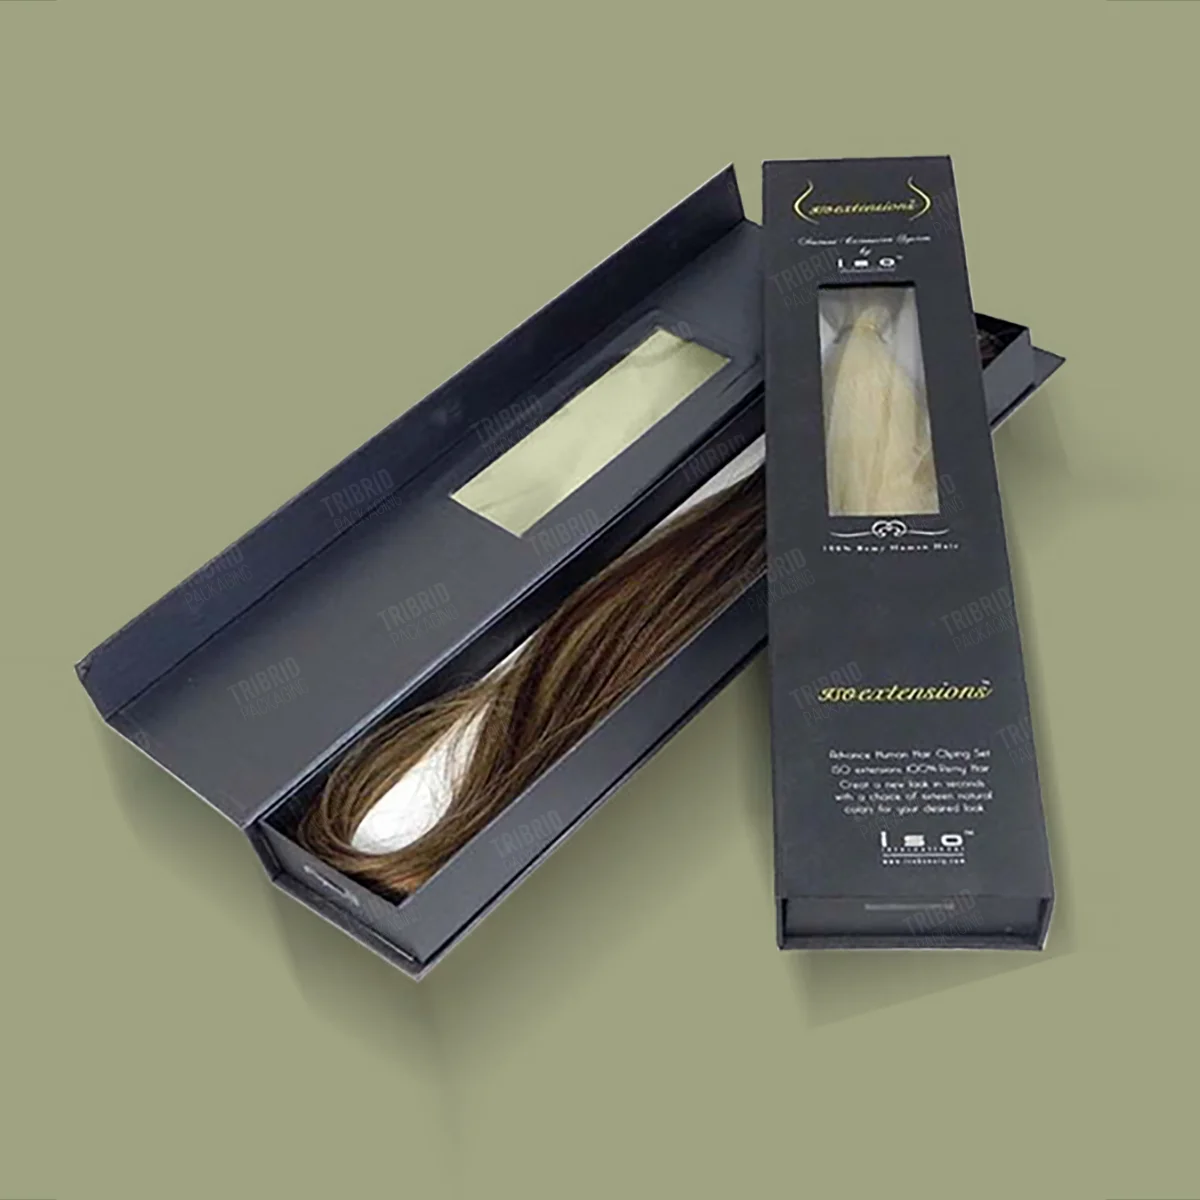 Hair Extension Boxes: Protecting and Promoting Products